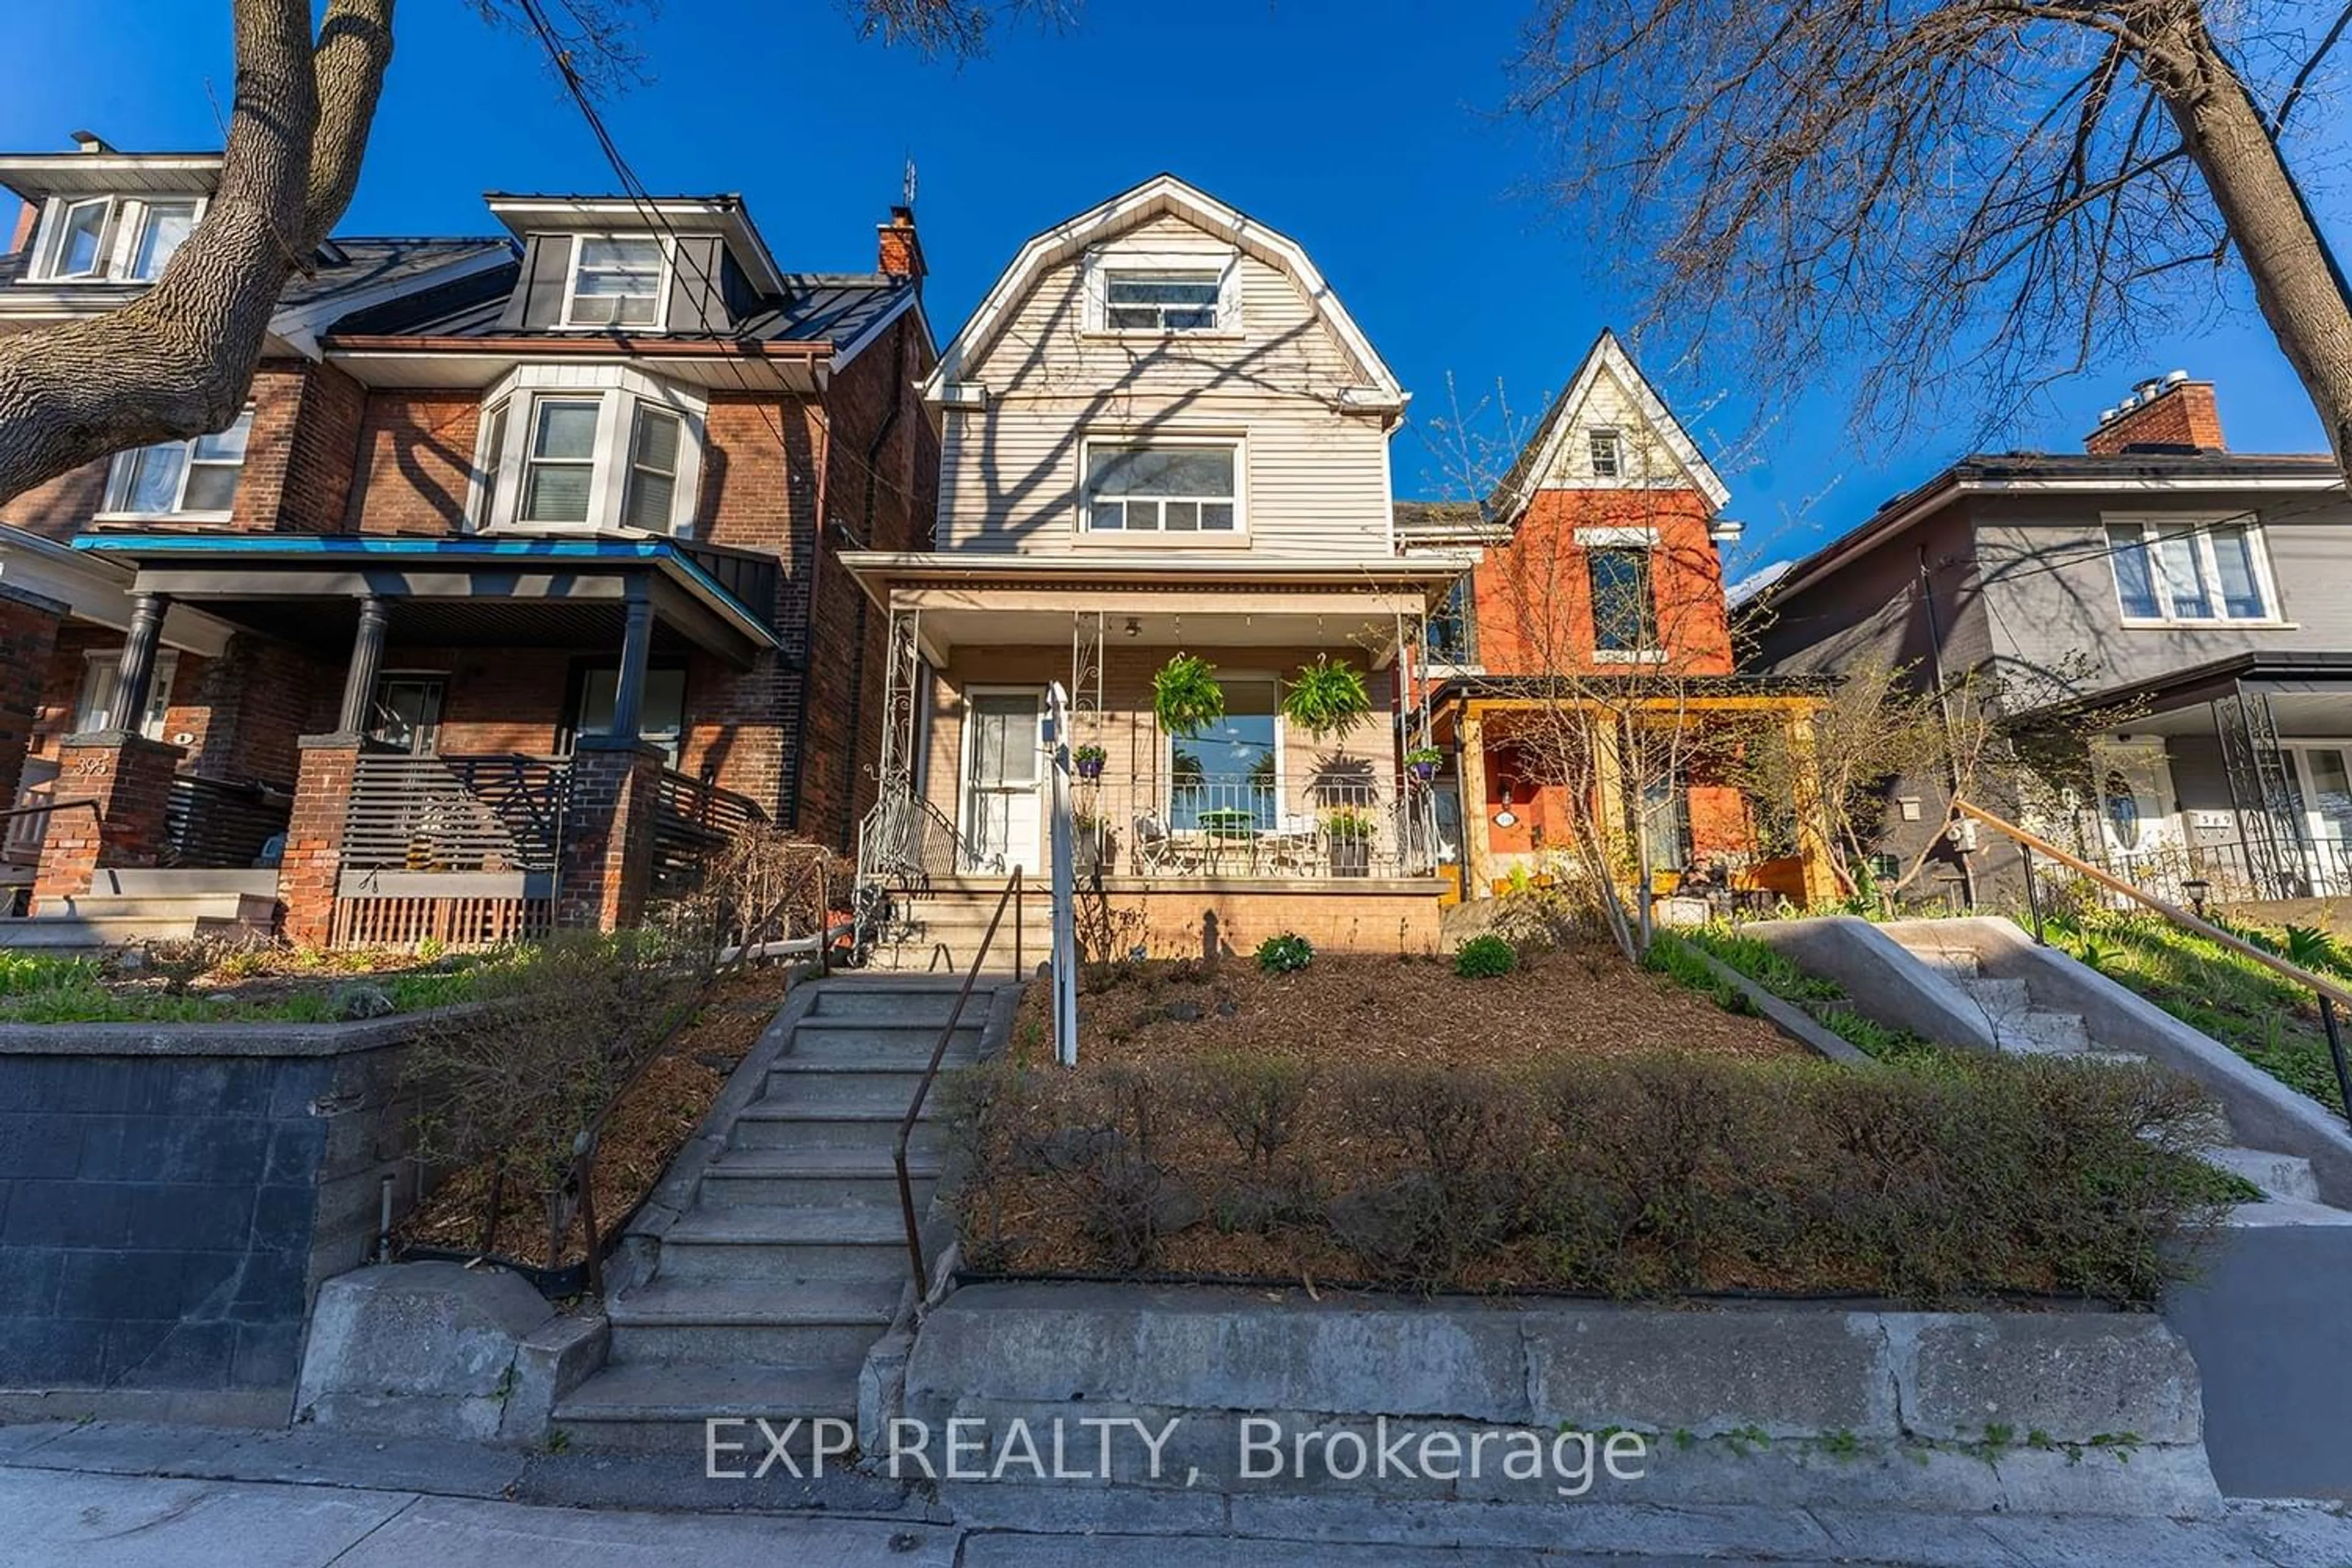 Frontside or backside of a home for 393 Ossington Ave, Toronto Ontario M6J 3A6